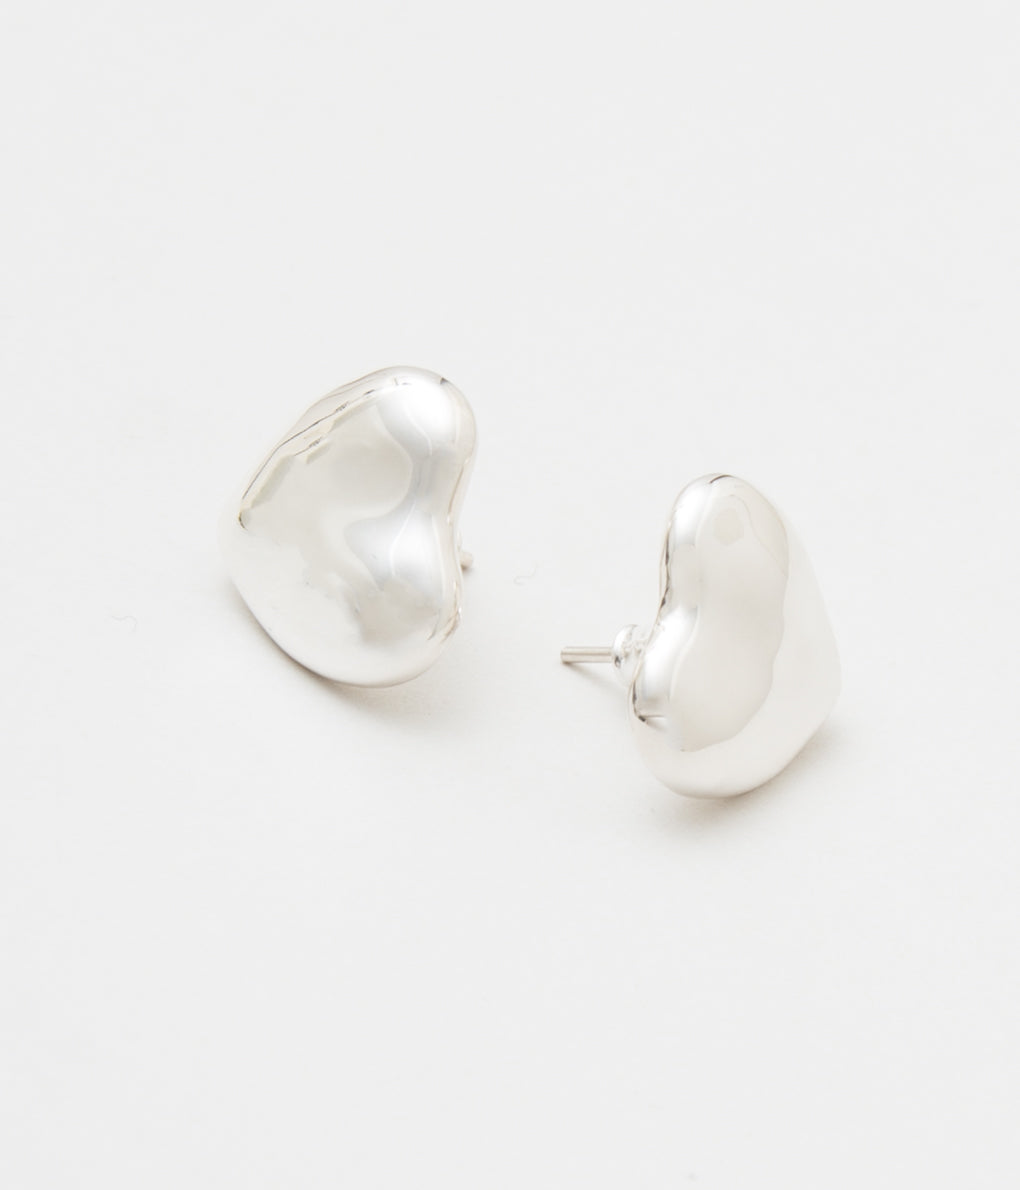 LE CHIC RADICAL "HEART SILVER STUD EARRINGS" (SILVER)